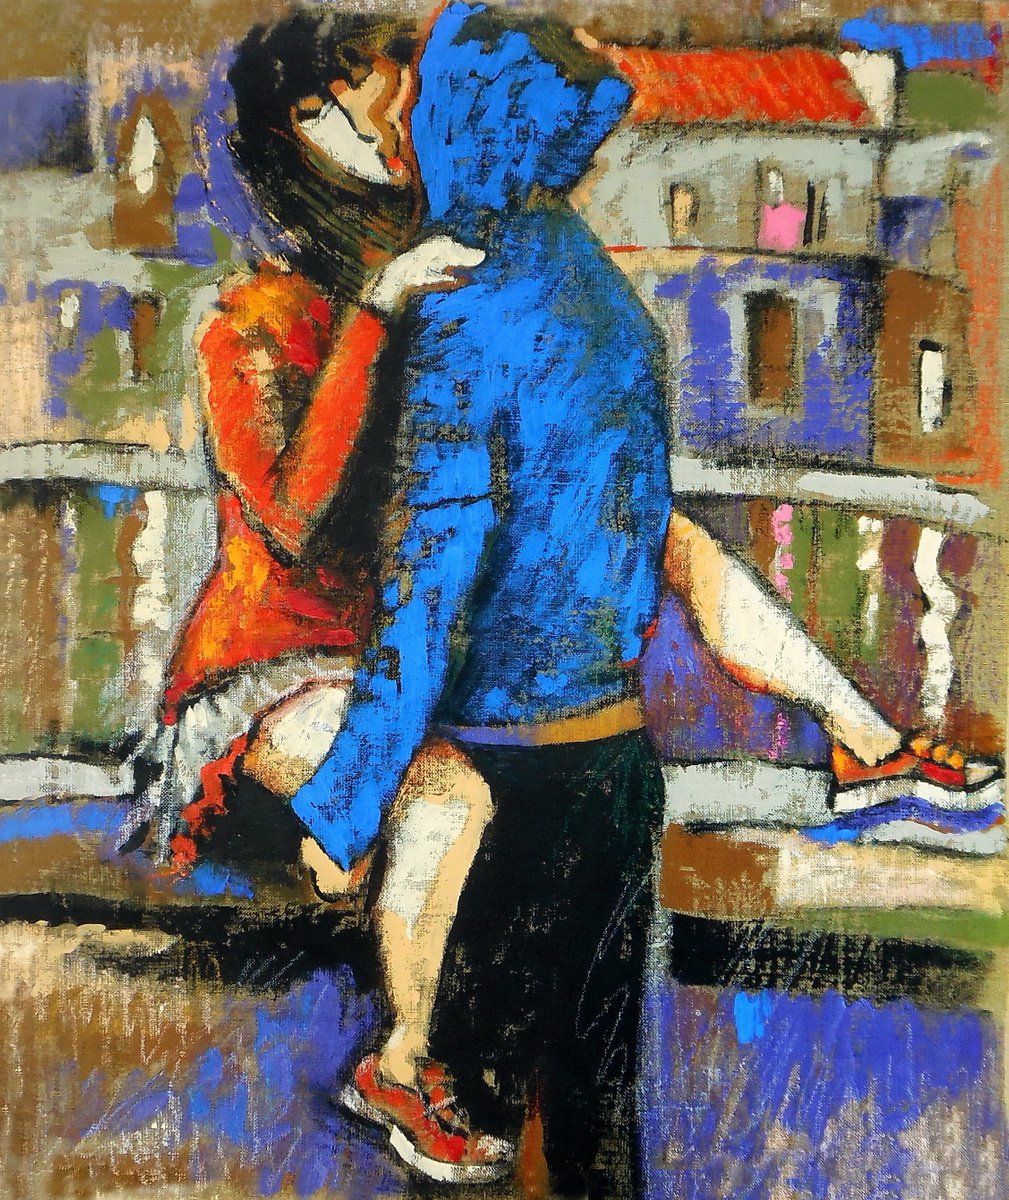 Lovers in Red and Blue by Evgen Semenyuk